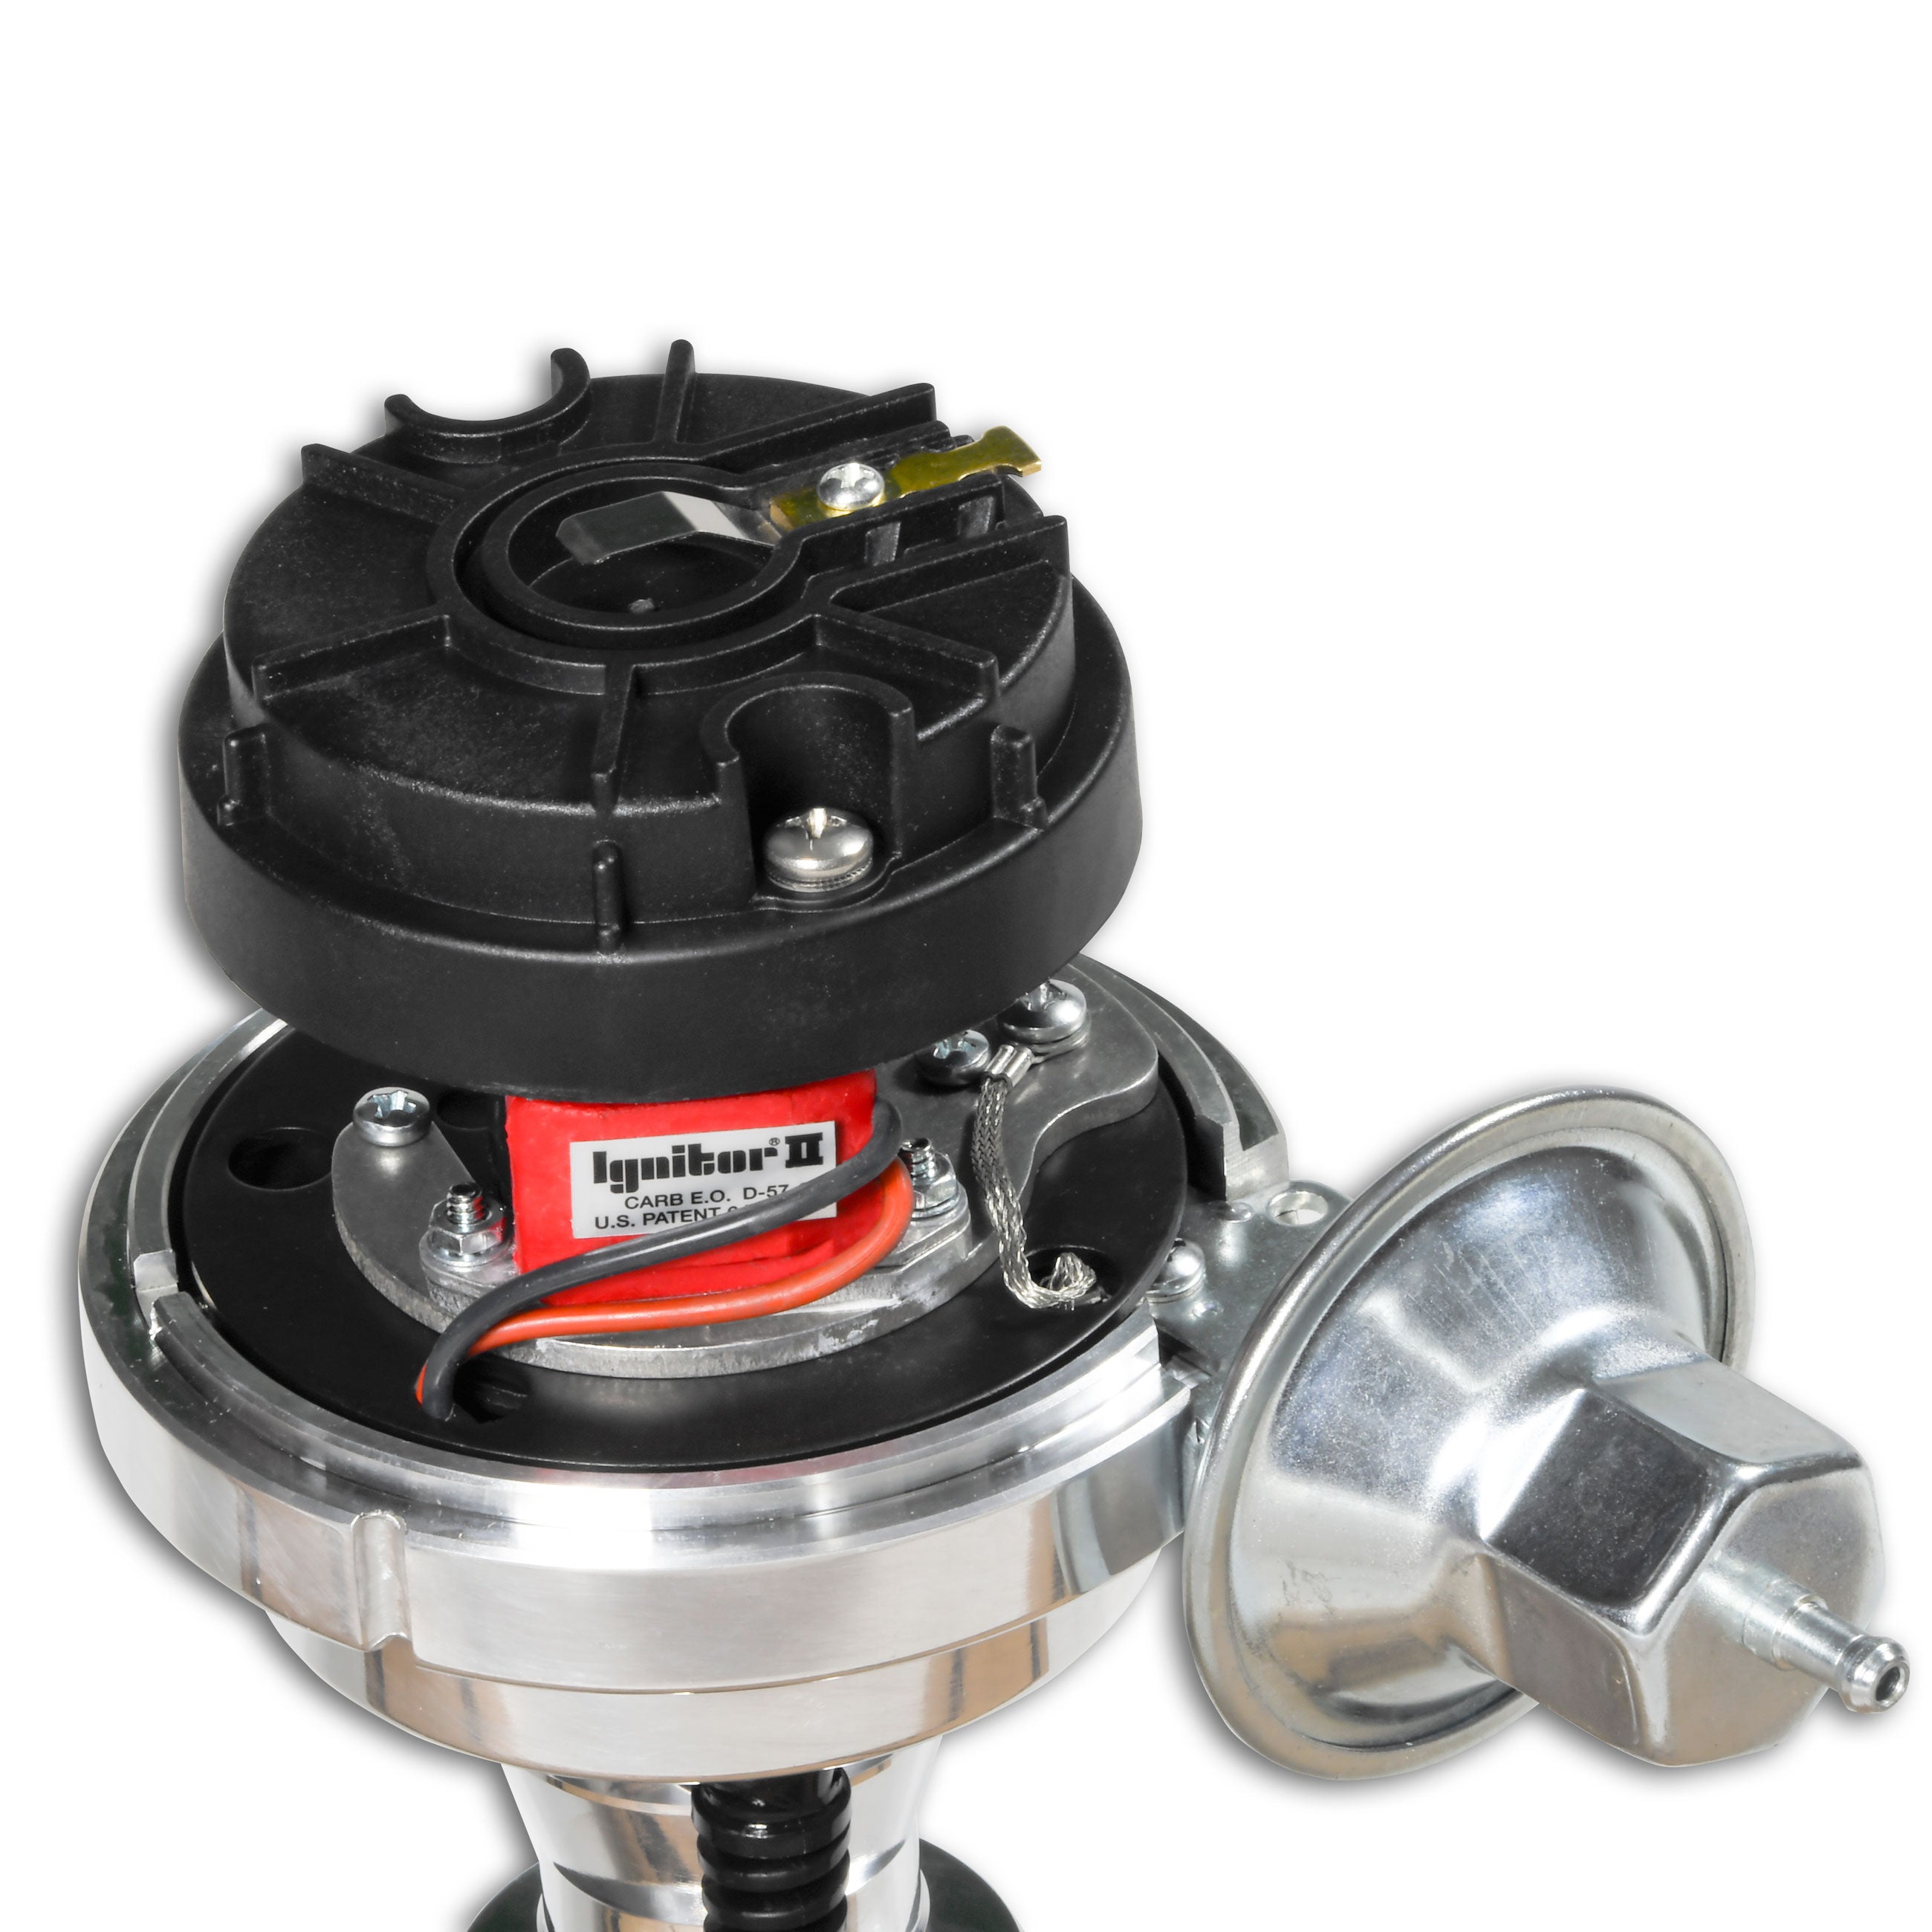 PerTronix | D170700 Billet Distributor with Ignitor II Cadillac